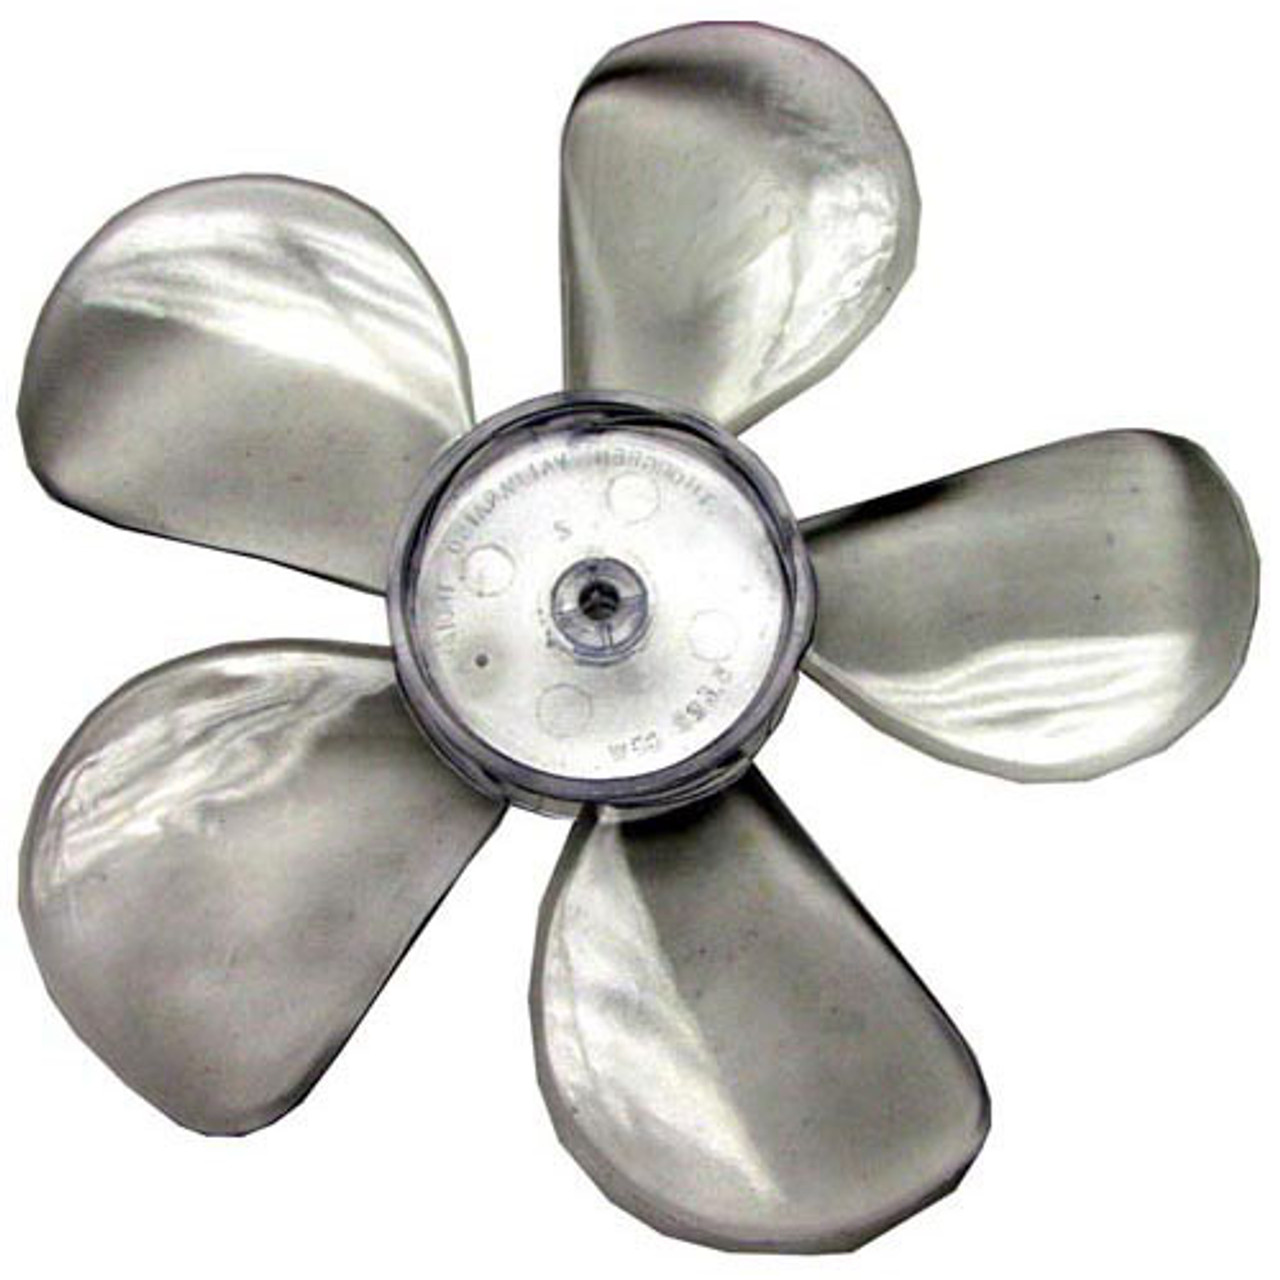 Fan Blade 5 1/2", Ccw - Replacement Part For McCall MCC13089